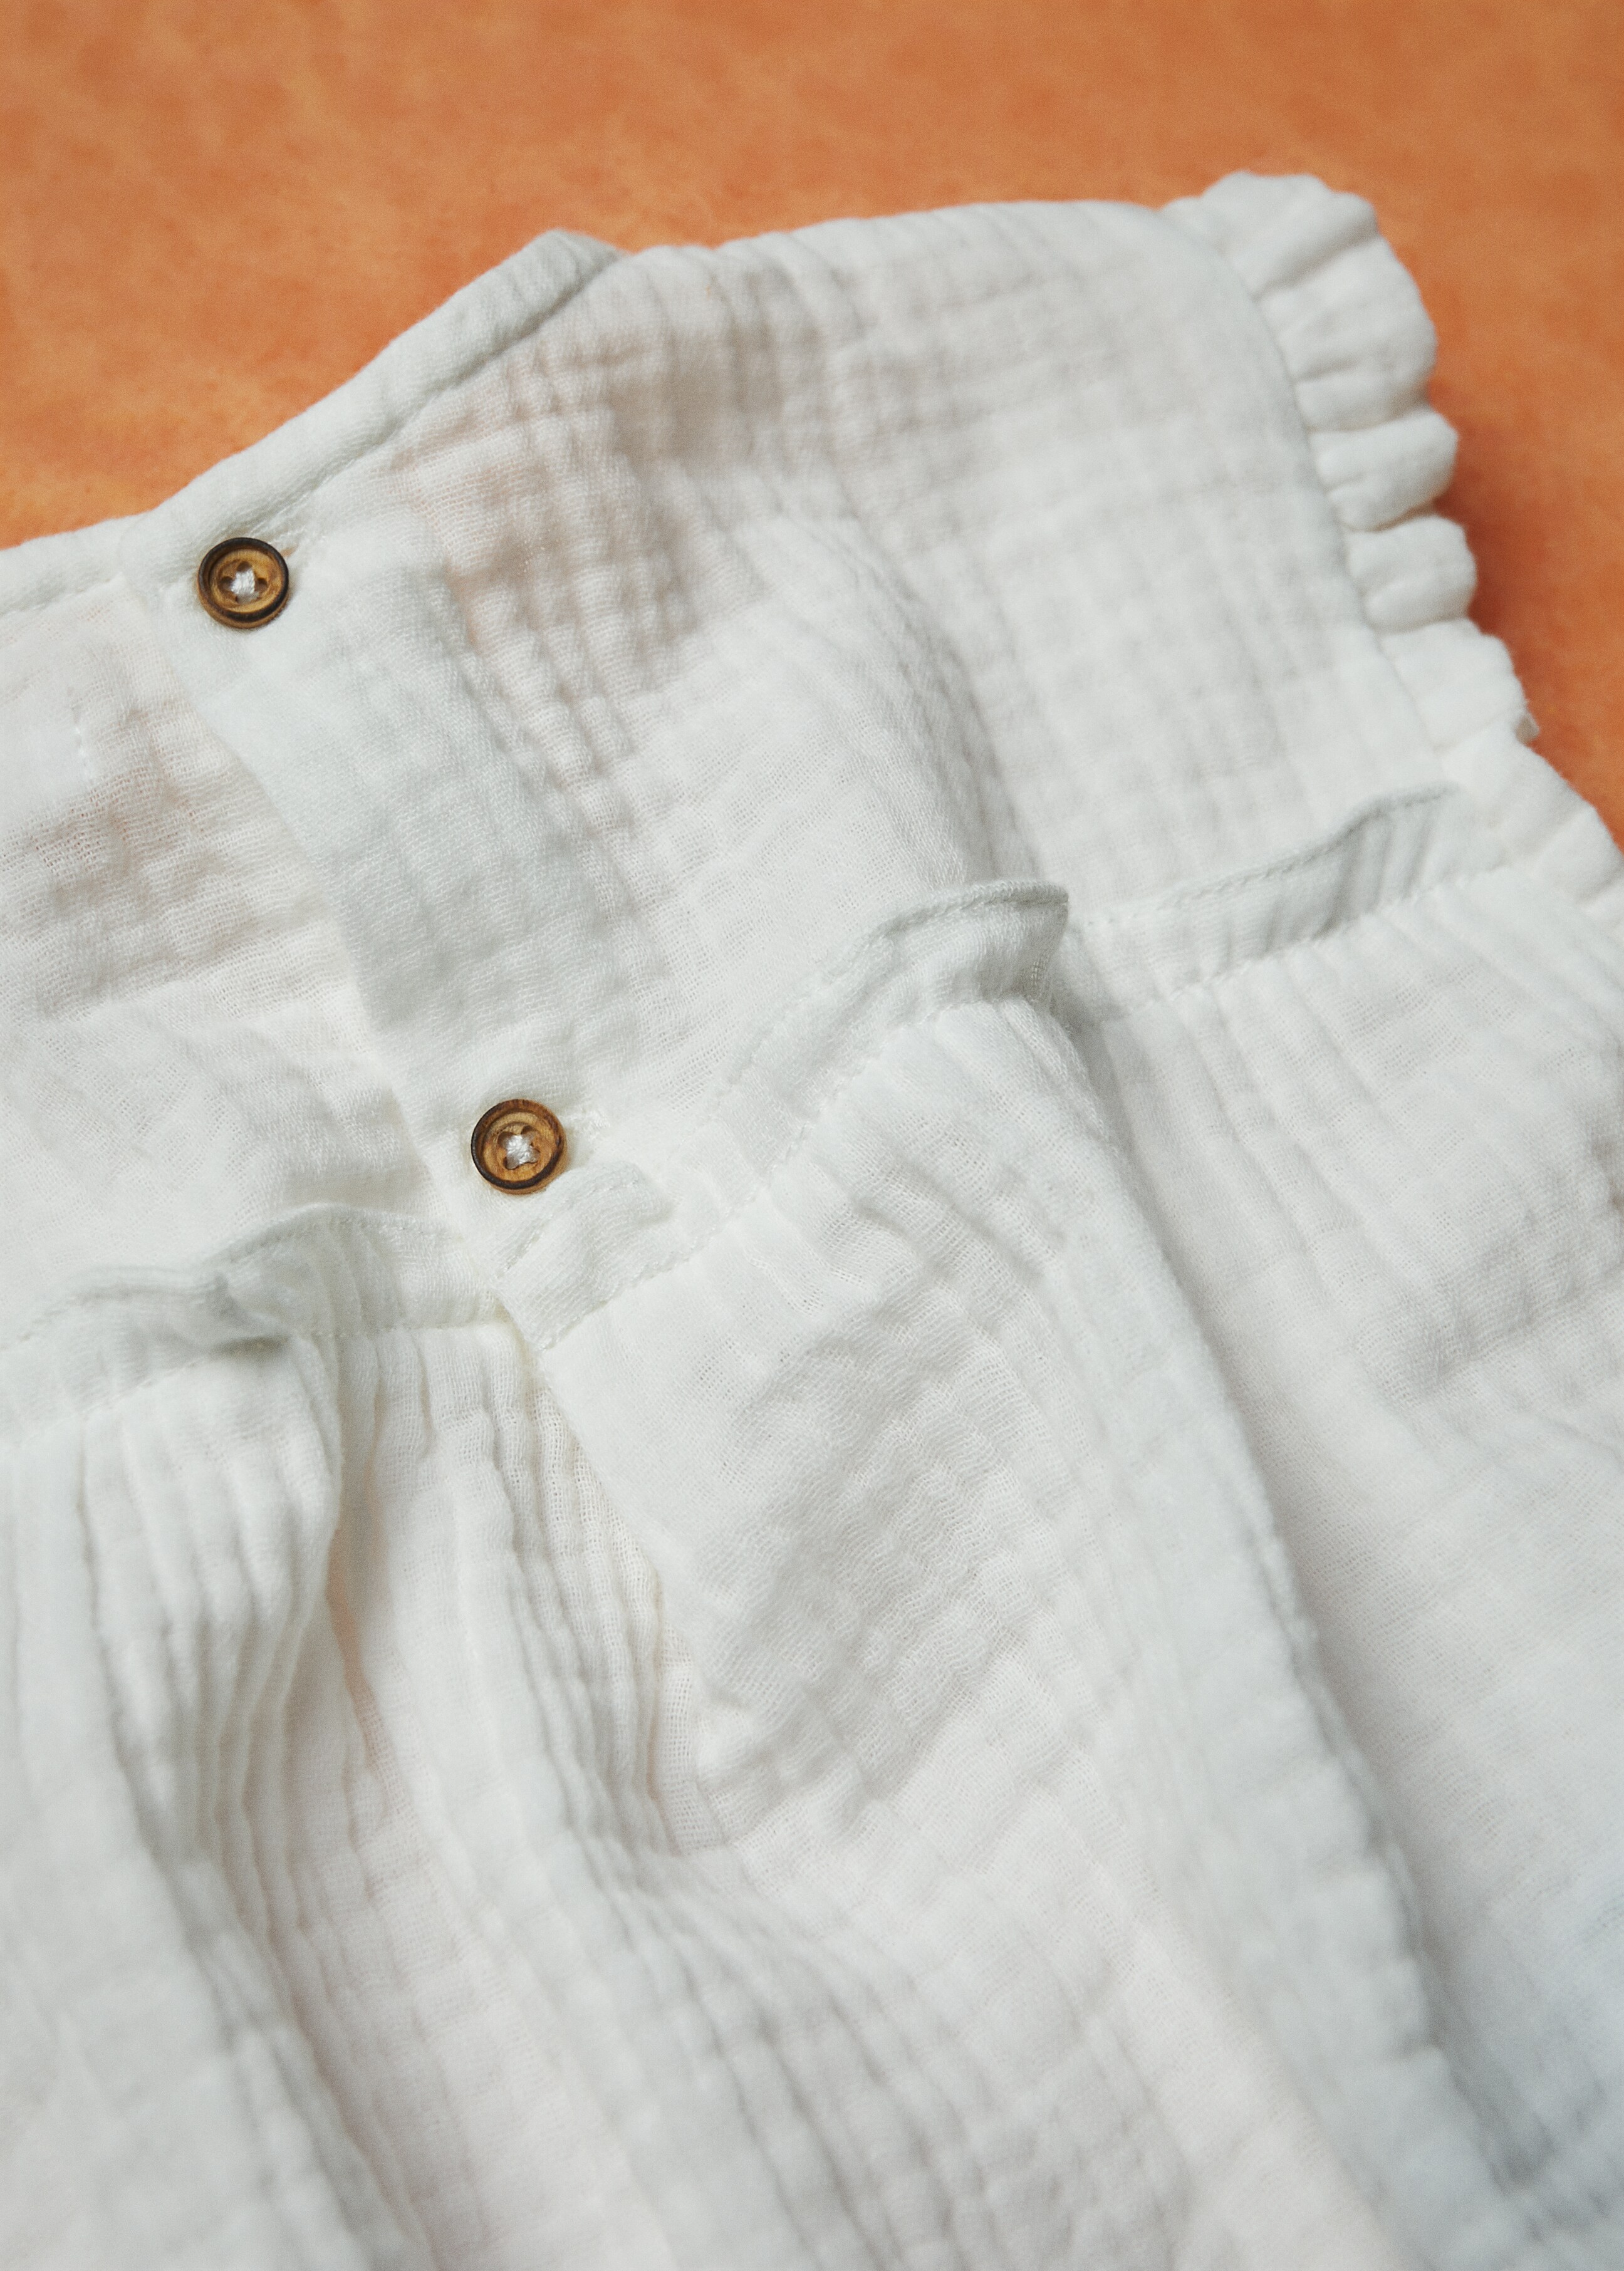 Ruffled cotton blouse - Details of the article 6